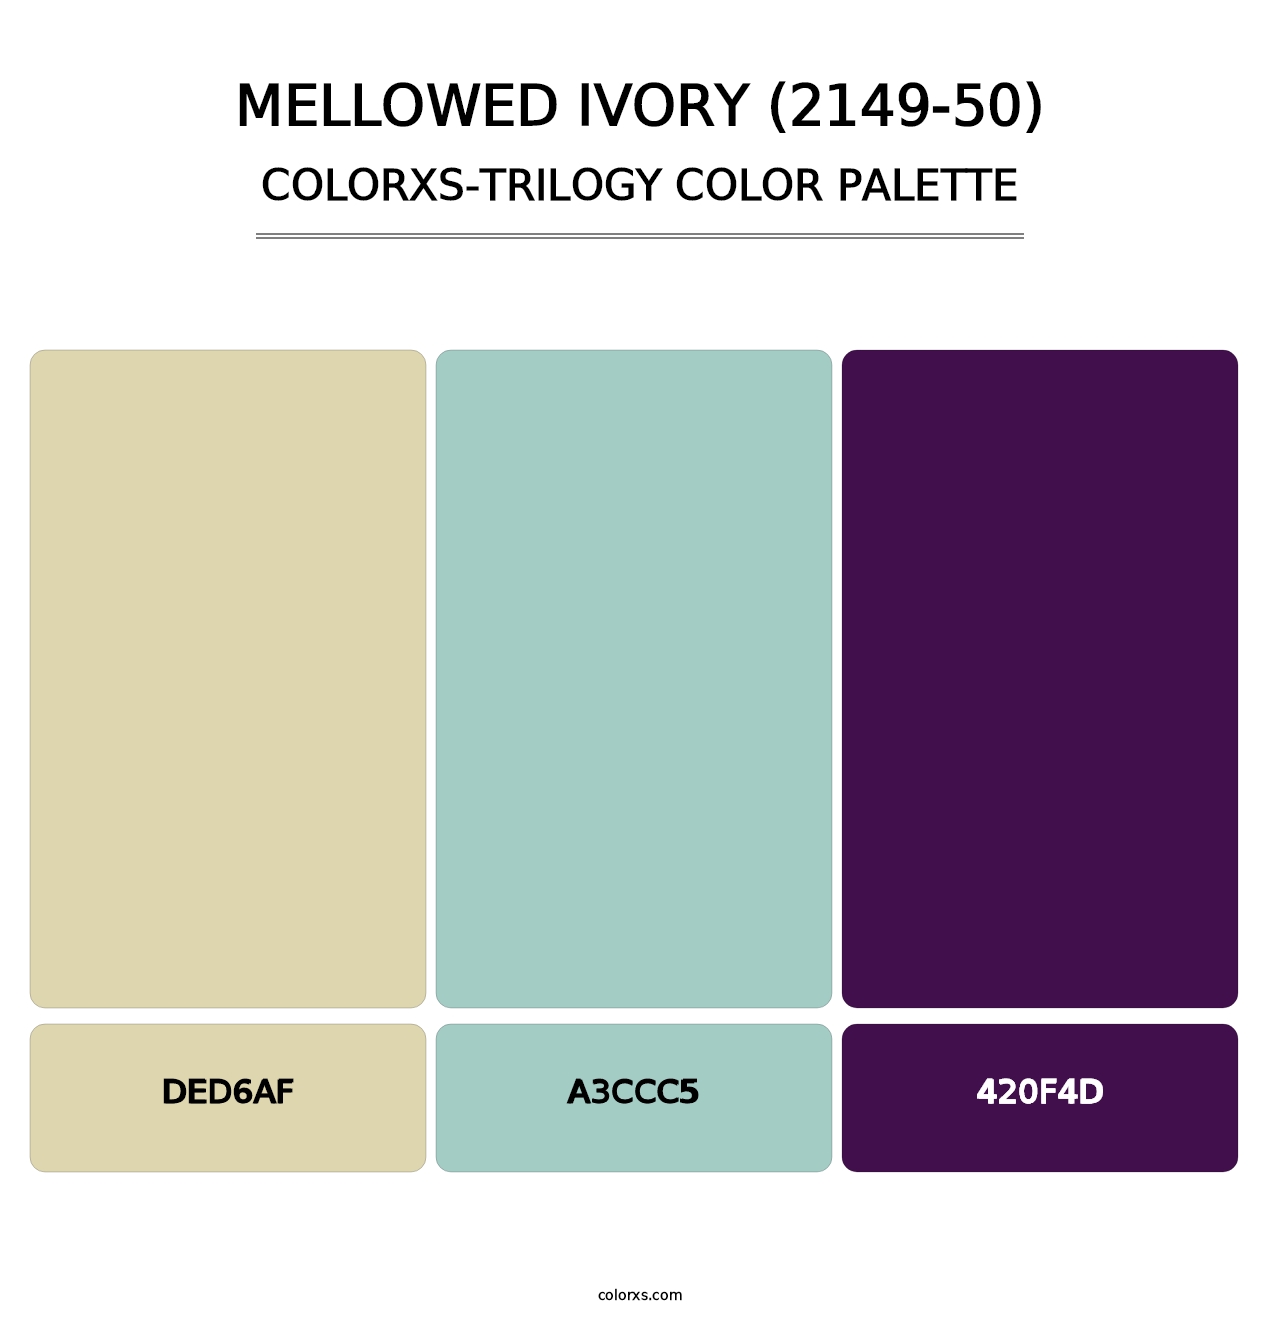 Mellowed Ivory (2149-50) - Colorxs Trilogy Palette